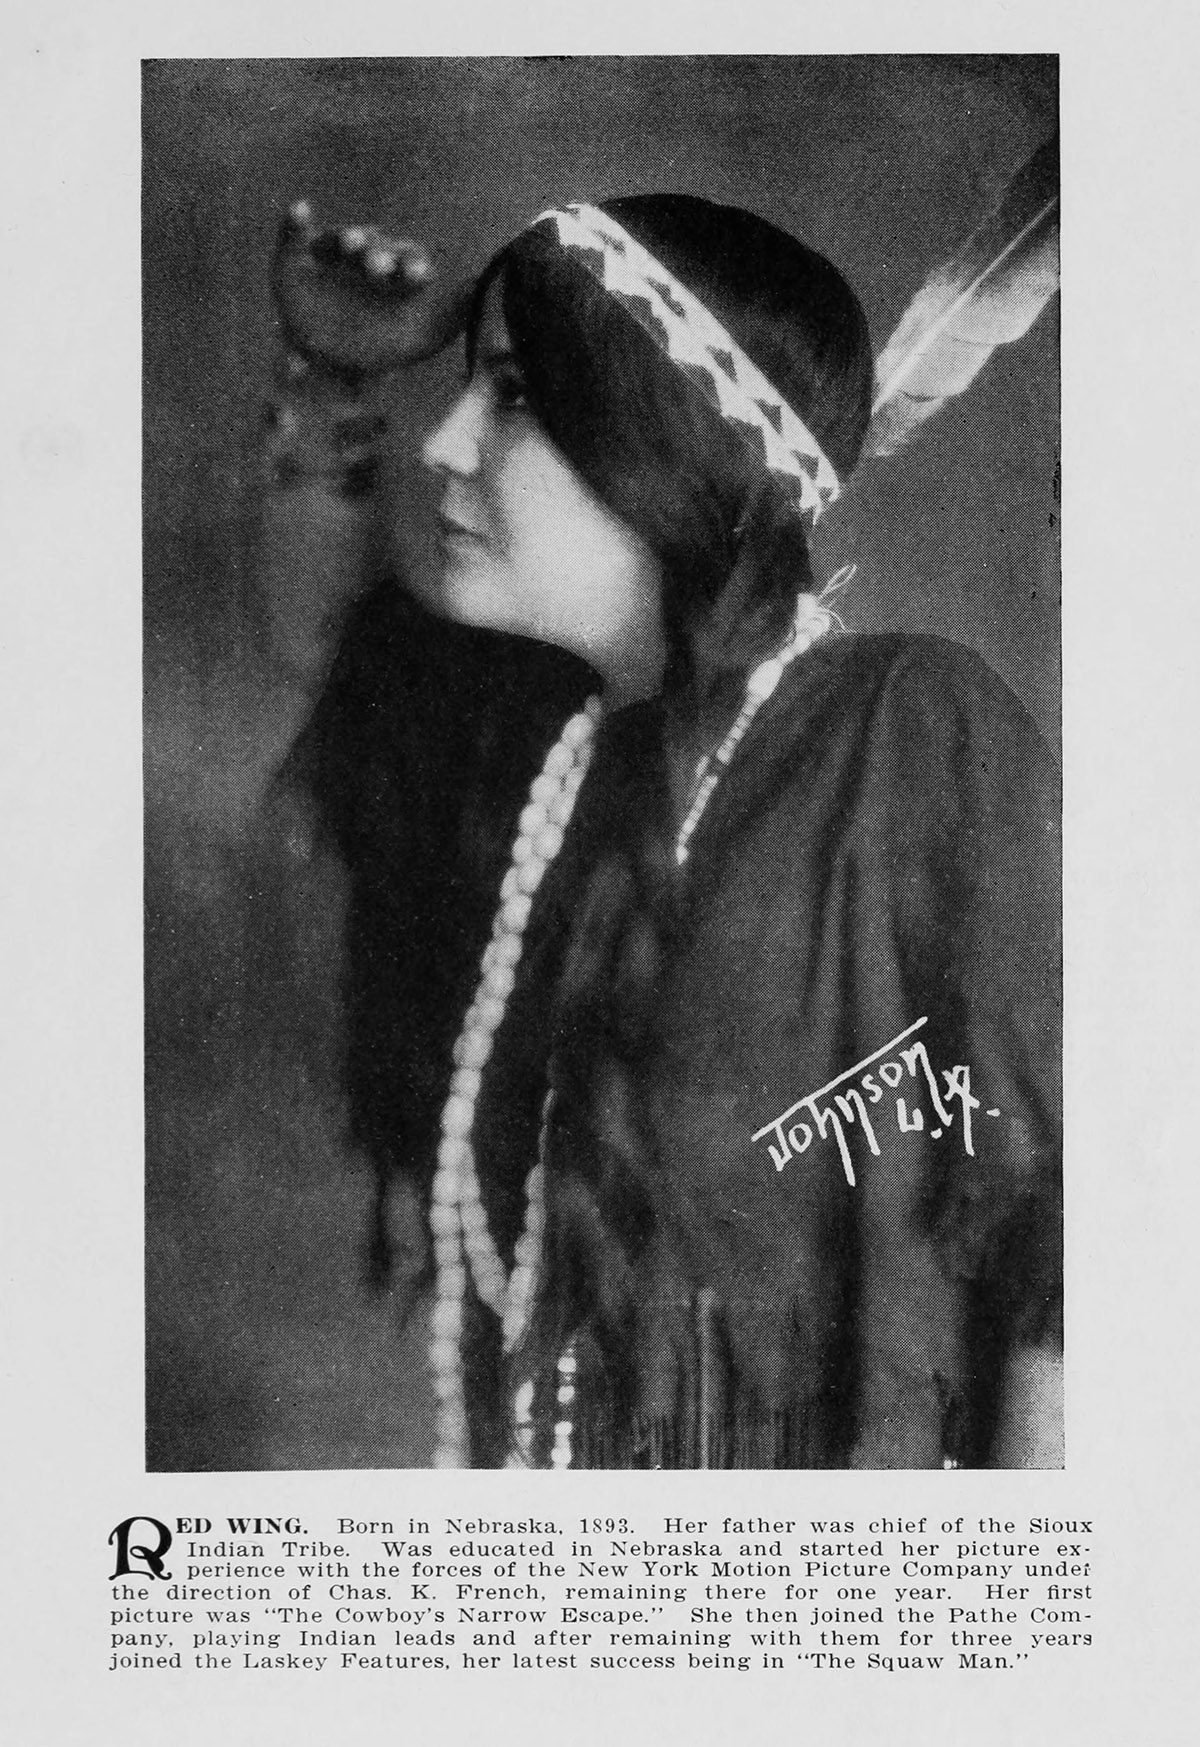 A portrait of Lillian St. Cyr published in 1914.